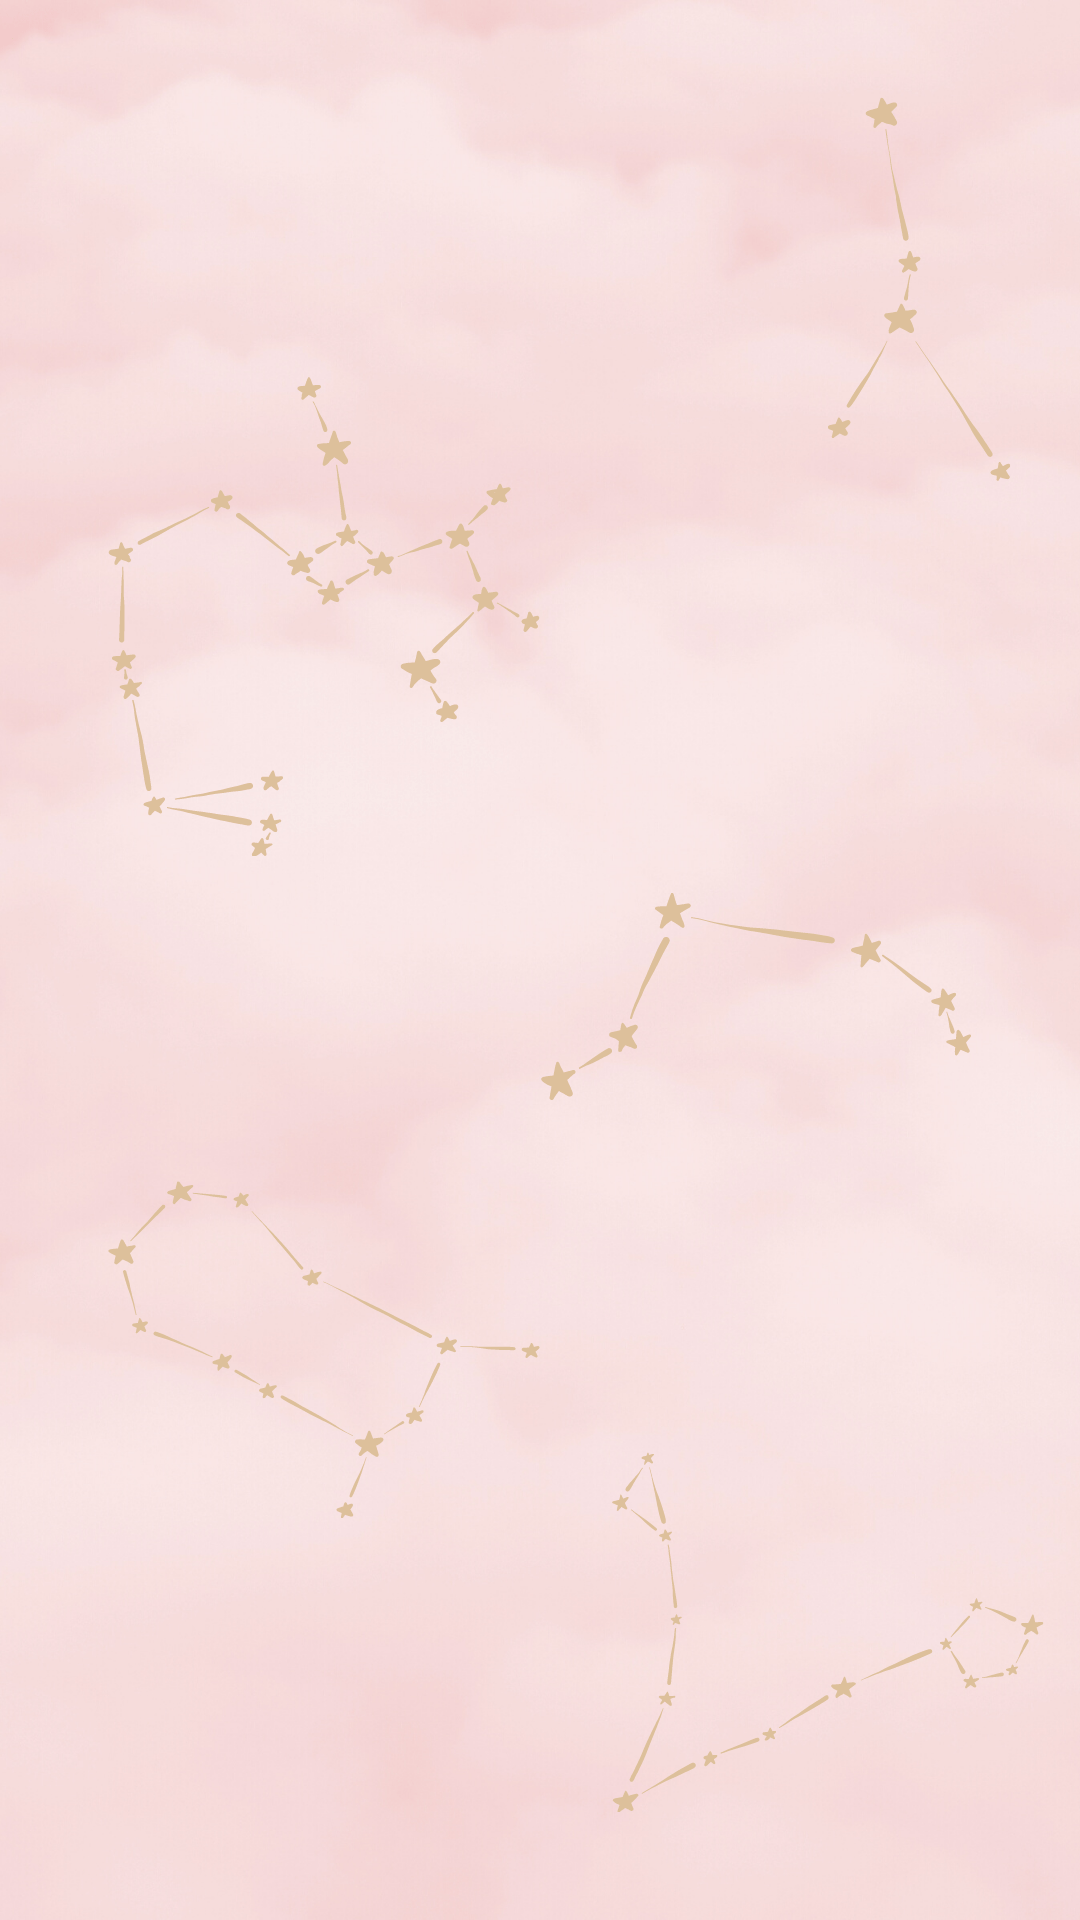 A pink sky with stars and constellations - Constellation